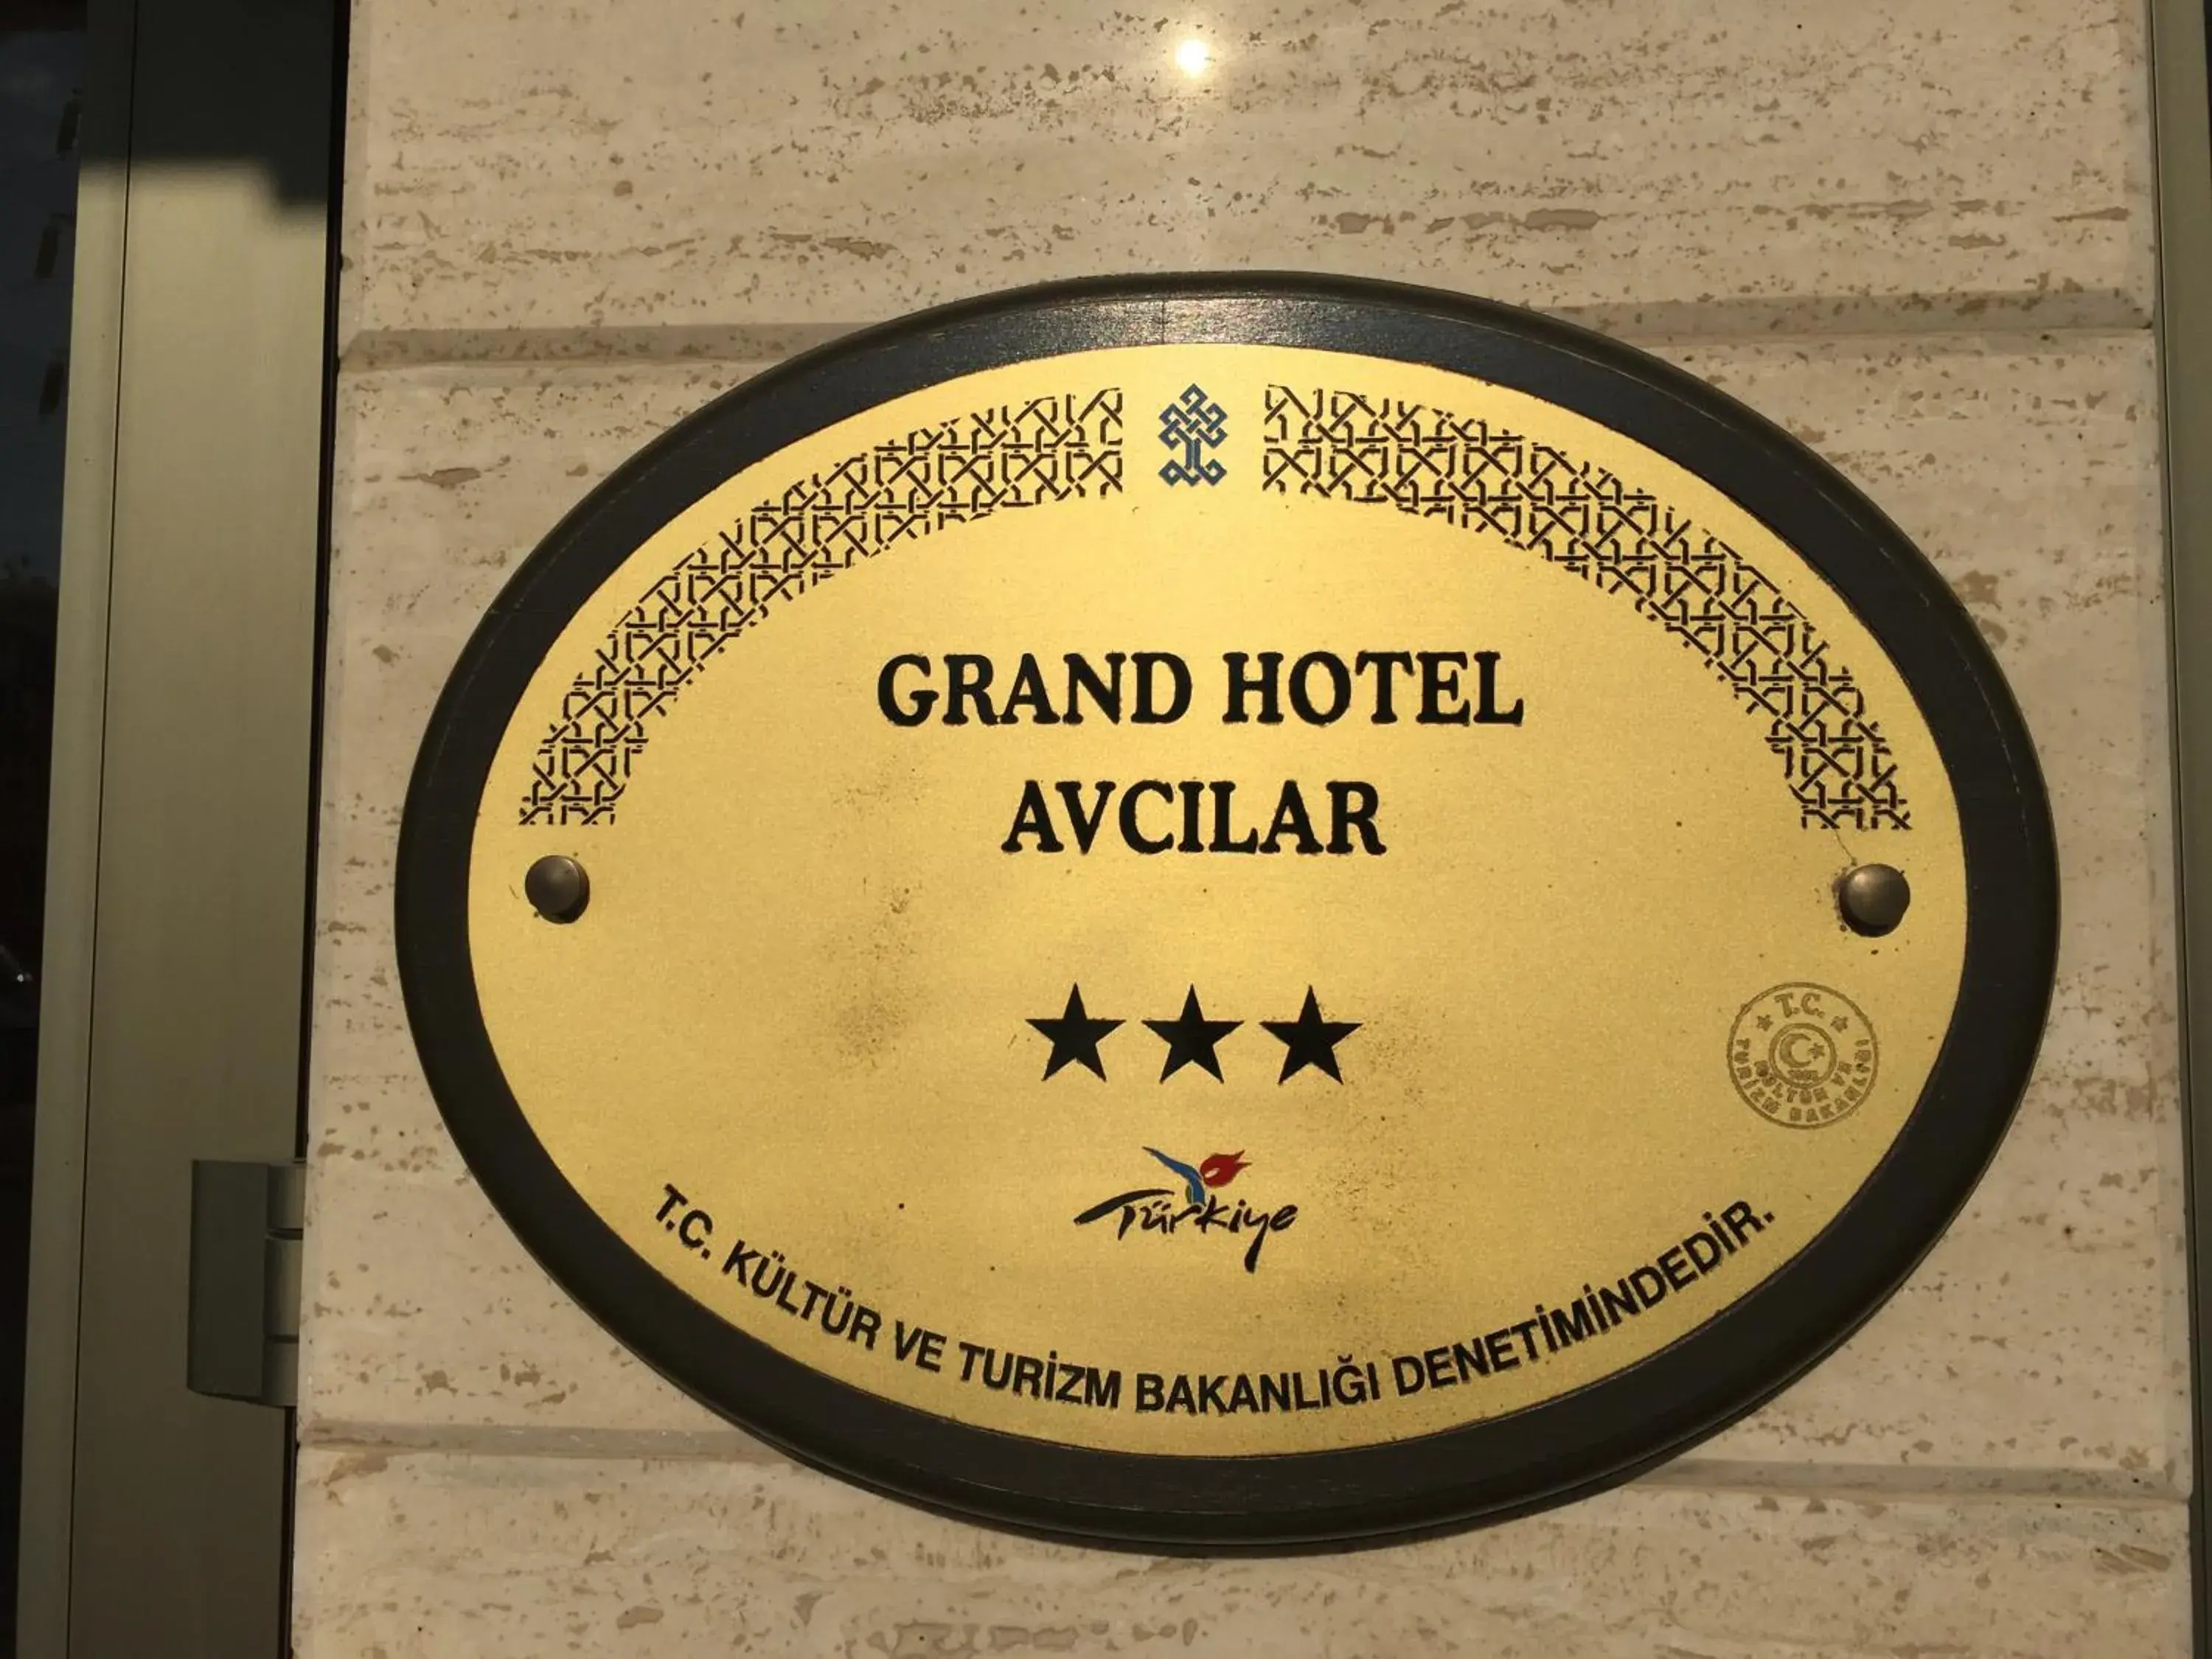 Property logo or sign, Property Logo/Sign in Grand Hotel Avcilar